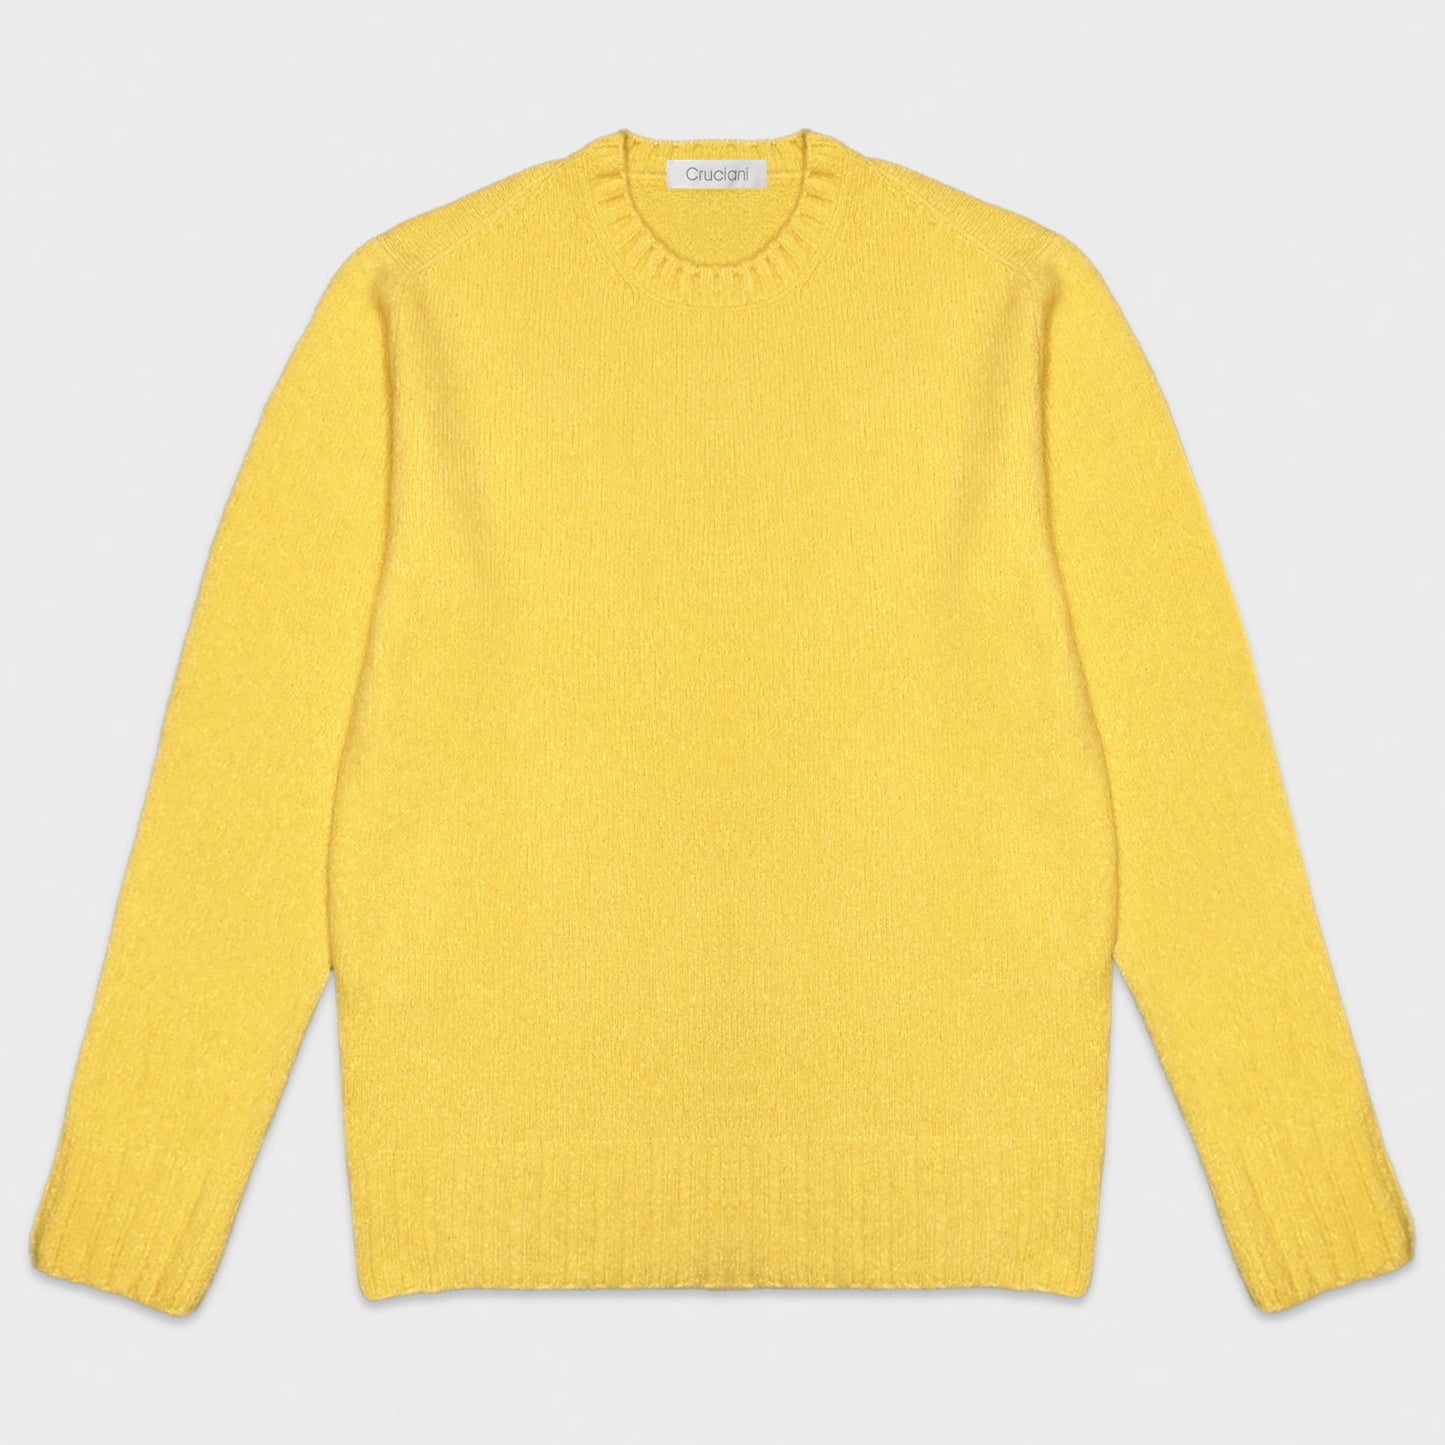 Lemon Yellow Shetland Wool Crewneck Sweater Cruciani. It is not a sweater made with wool from the Shetland Islands in Scotland, it is a luxurious reinterpretation of the traditional Scottish Shetland sweater, made in Italy by Cruciani, rib stitch neck.